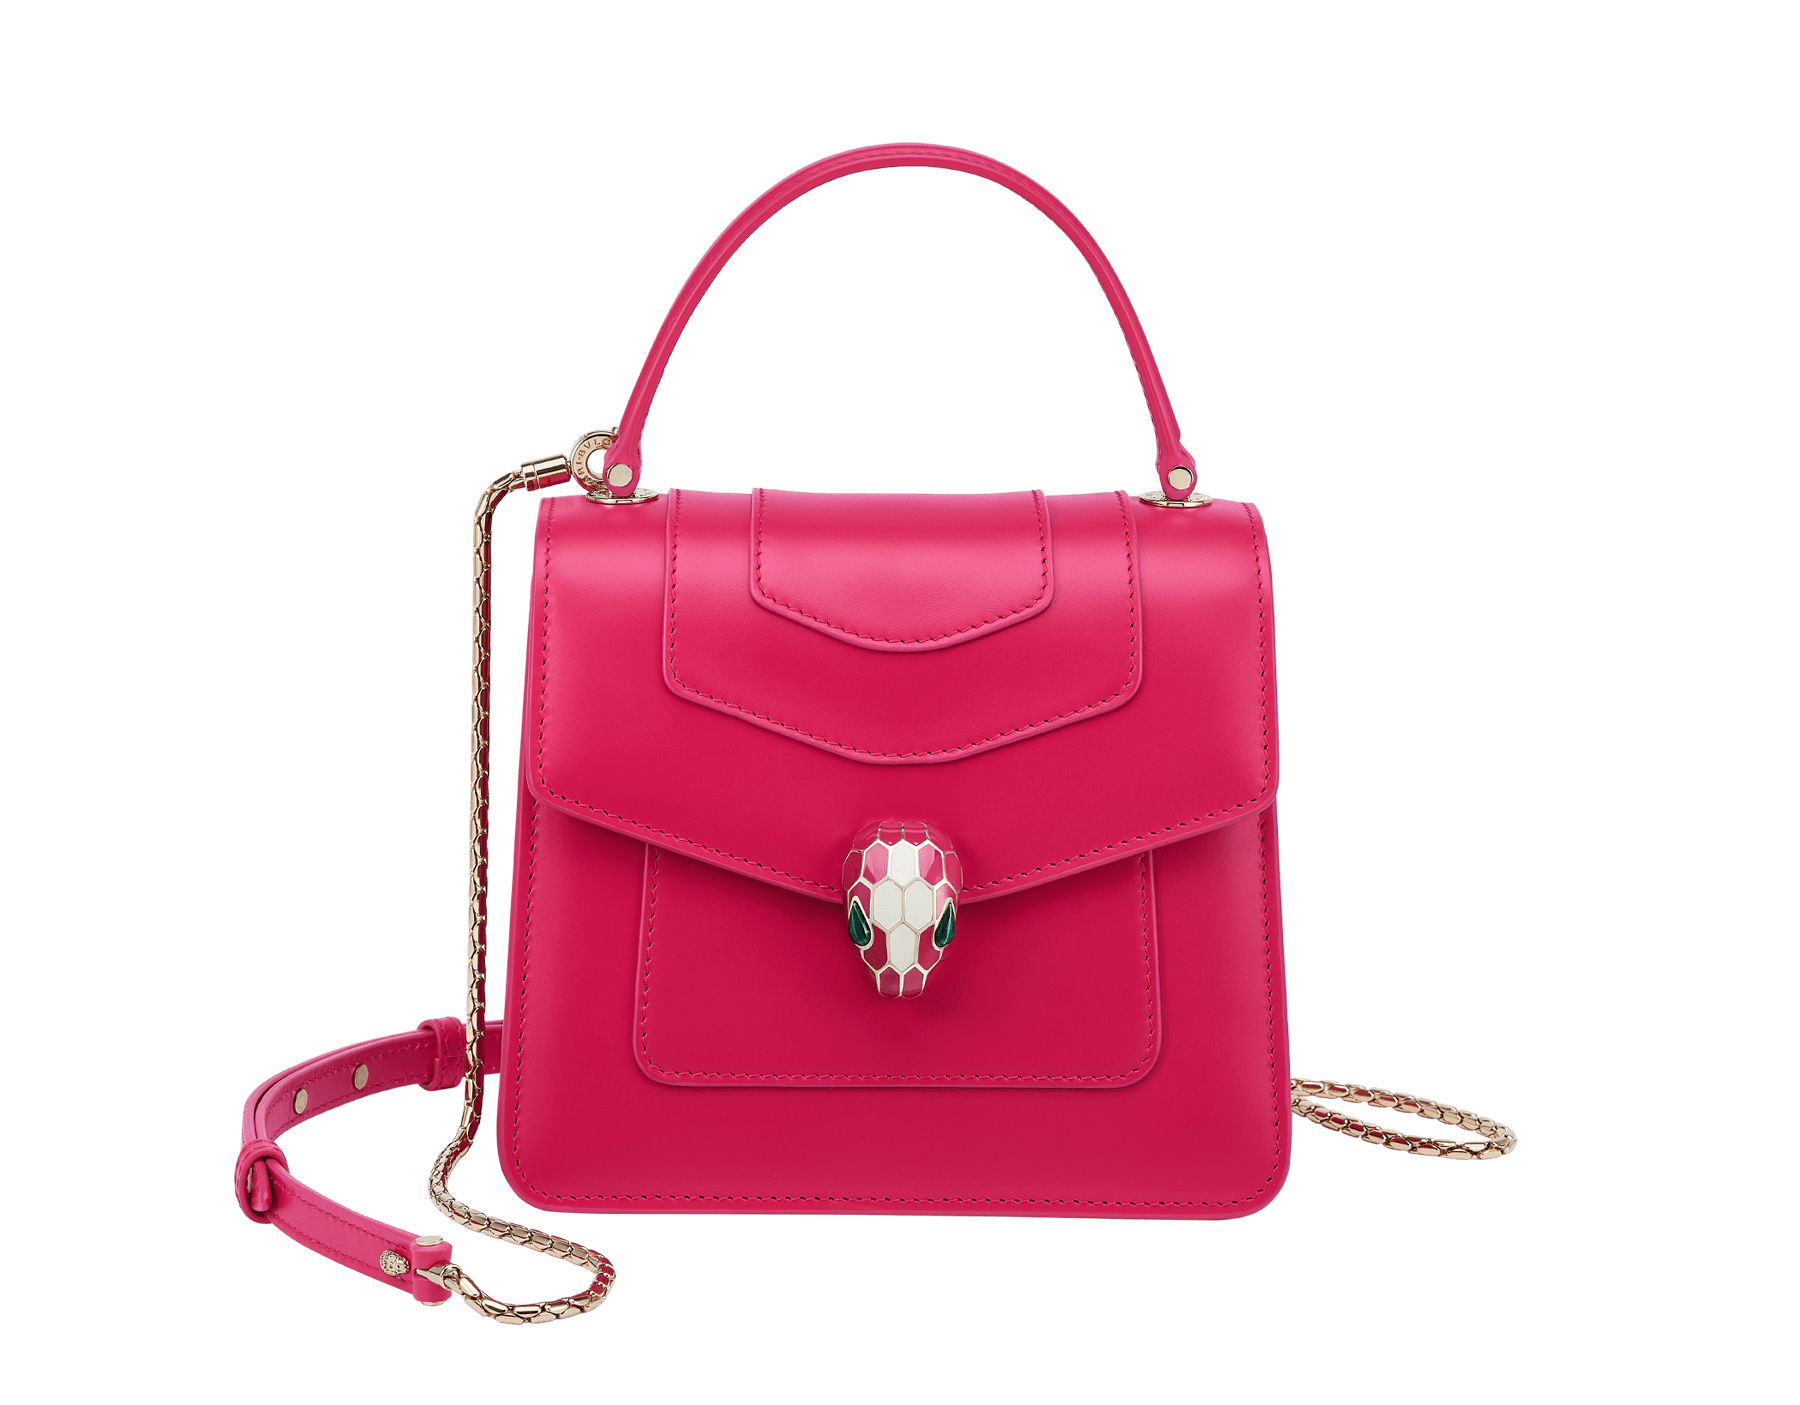 “Serpenti Forever ” top-handle bag in Lavender Amethyst lilac calf leather with Reef Coral red grosgrain inner lining. Iconic snakehead closure in light gold-plated brass embellished with black and white agate enamel and green malachite eyes. 1122-CLb image 1